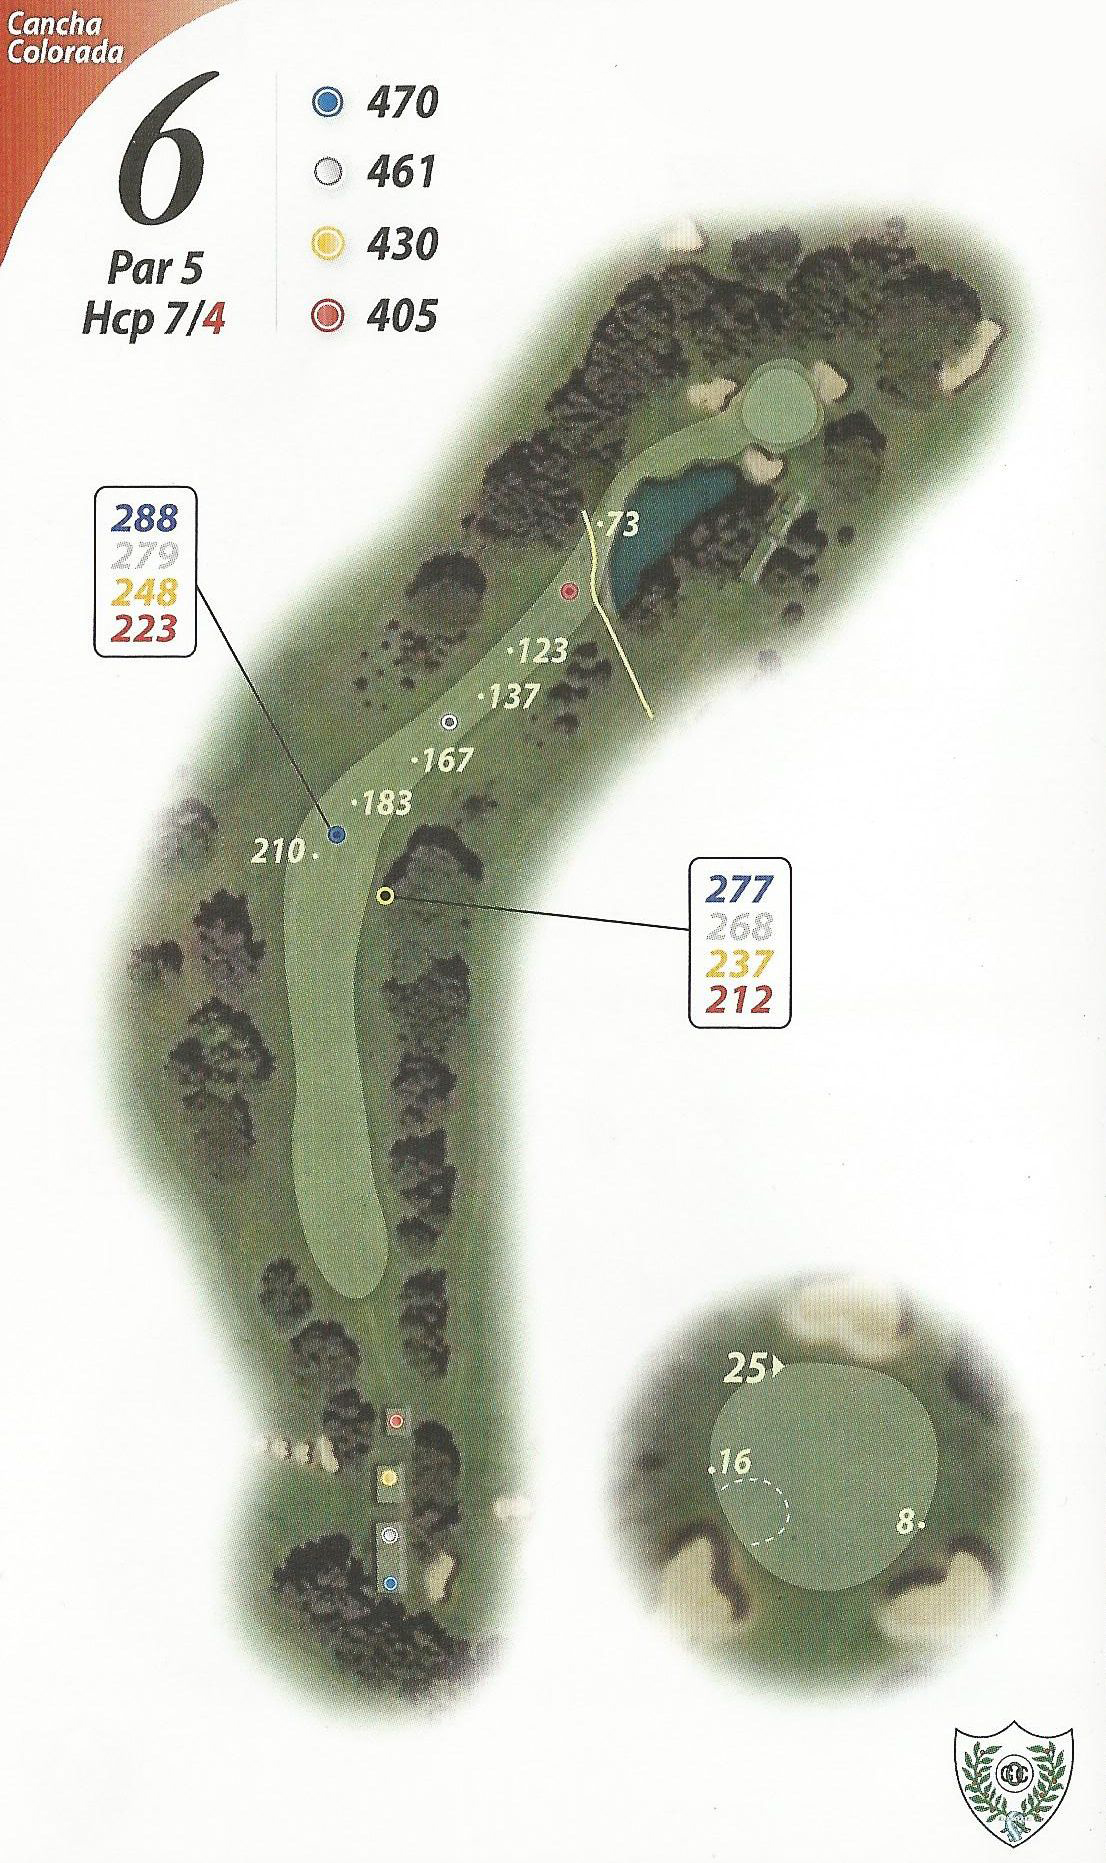 Hole 6 (red)